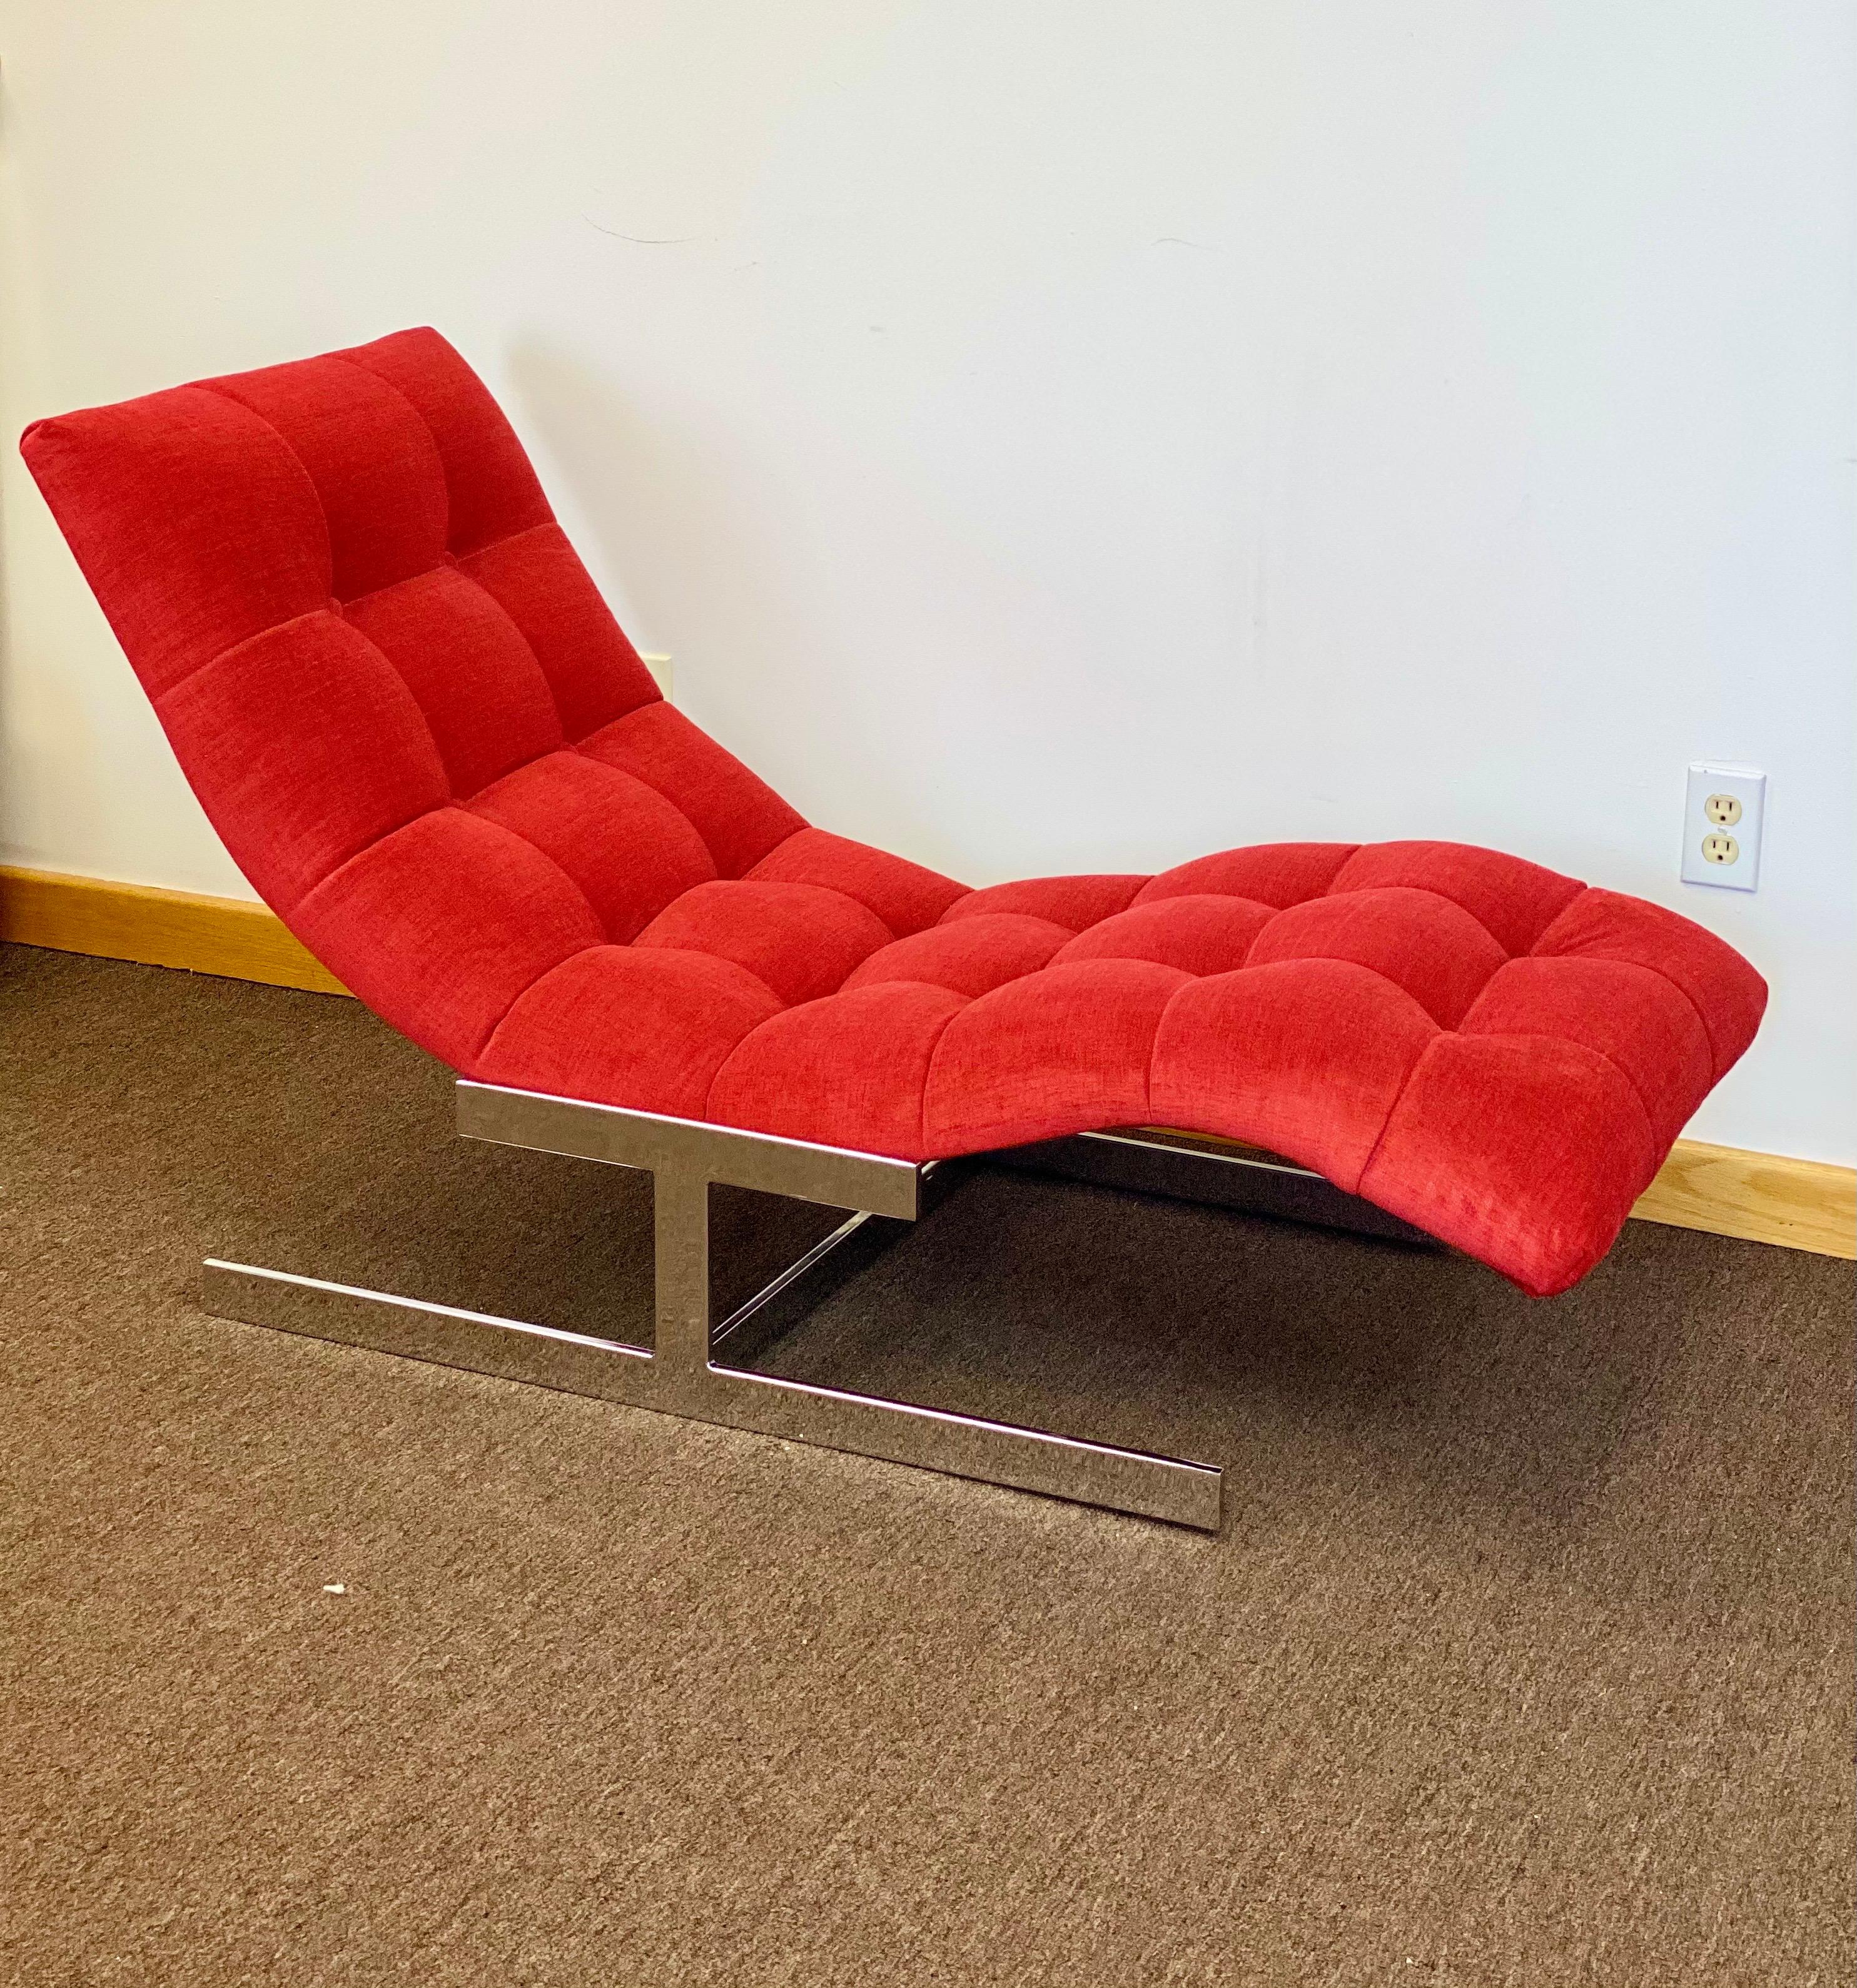 We are very pleased to offer a stunning wave chaise in the style of Milo Baughman, circa the 1970s. This piece showcases a beautiful, tailored silhouette with a square button-tufted design. This elegant piece has been professionally reupholstered in